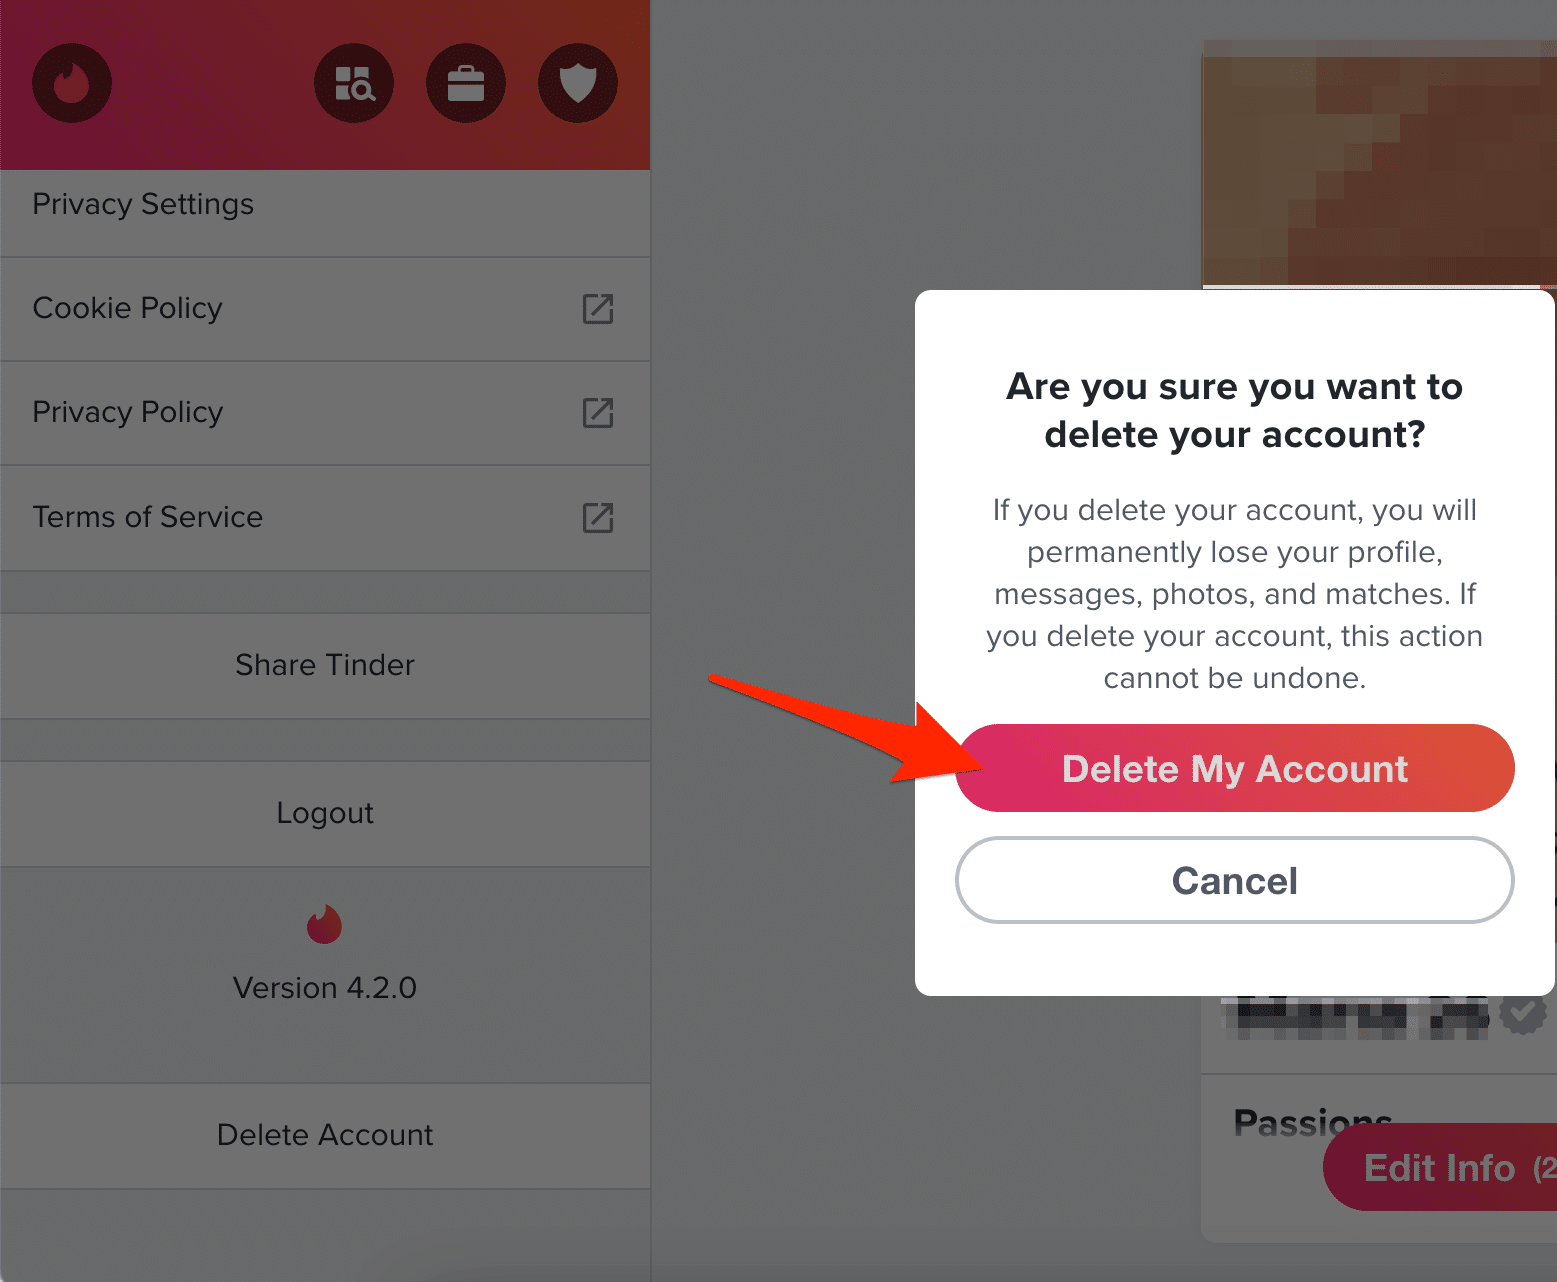 Confirm that you want to delete your profile by clicking "Delete My Account"